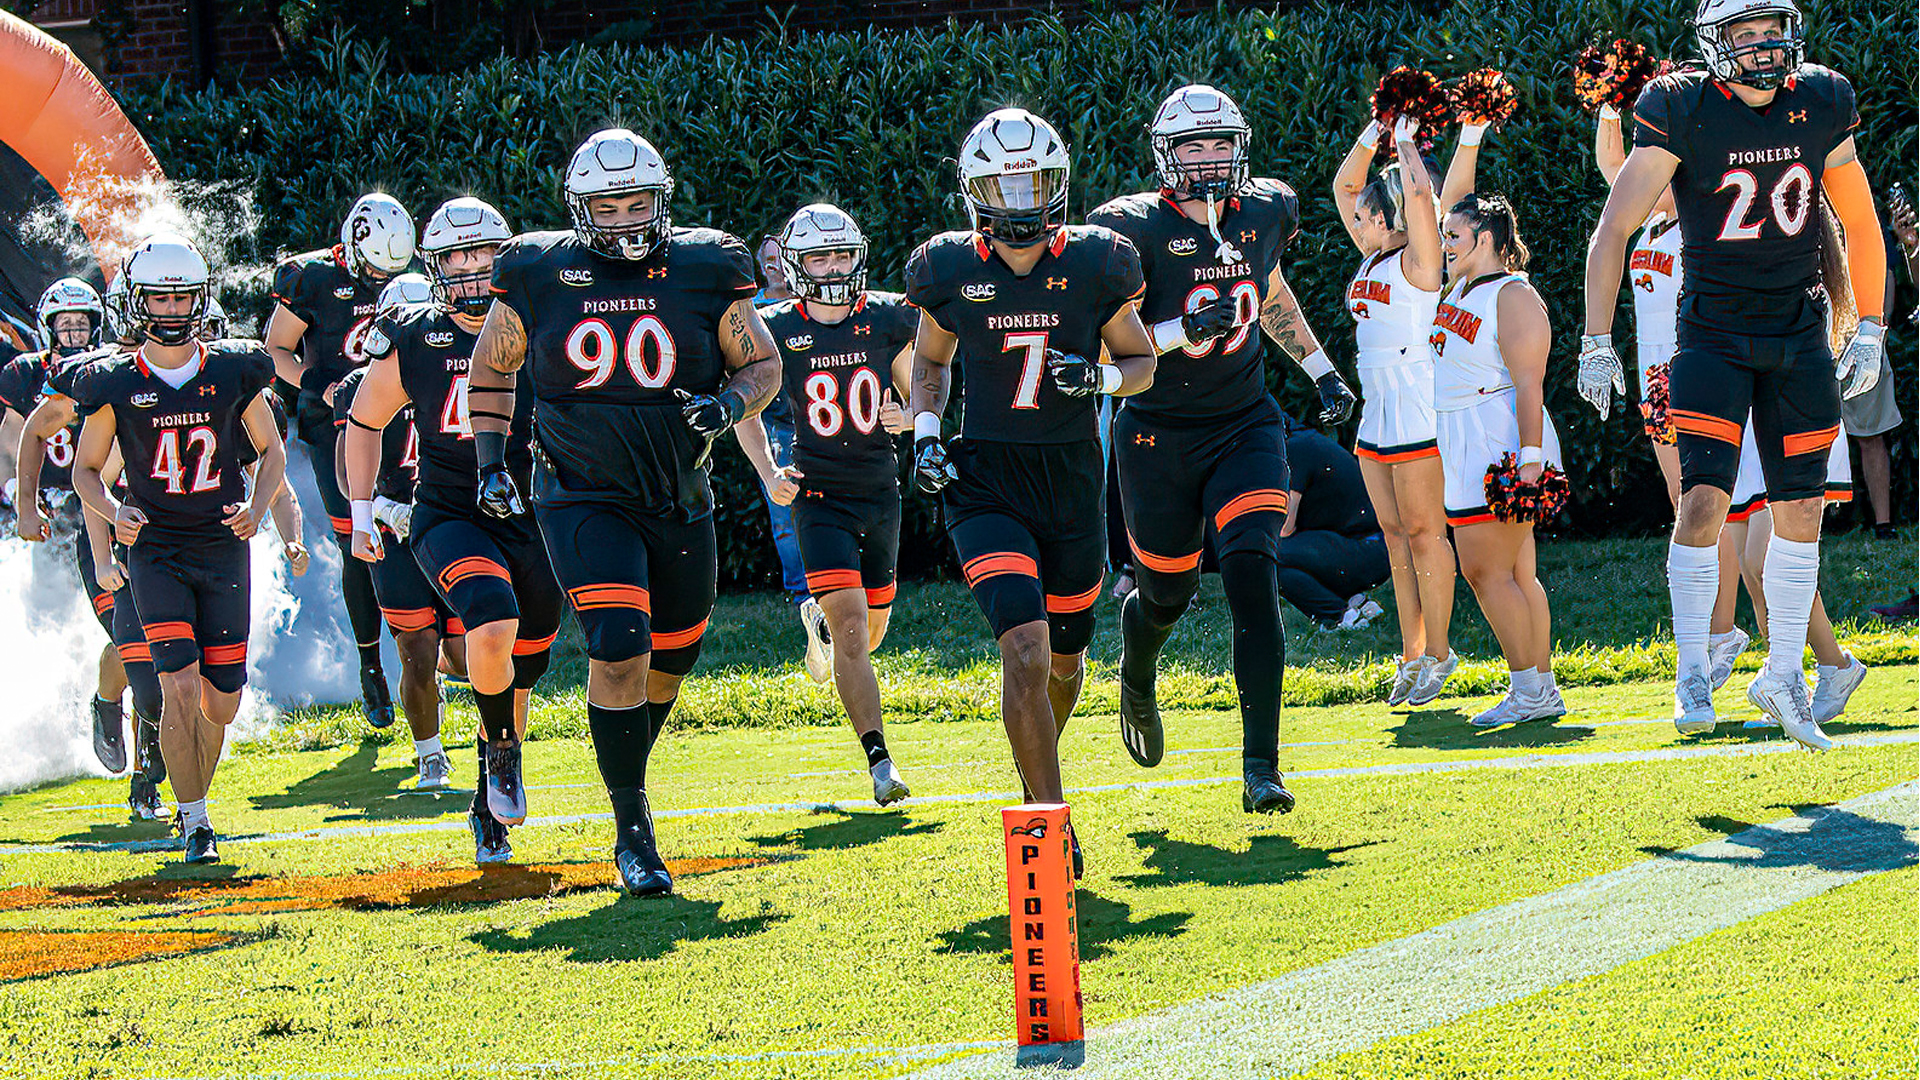 Tusculum hosts Barton on Saturday for Breast Cancer Awareness Game